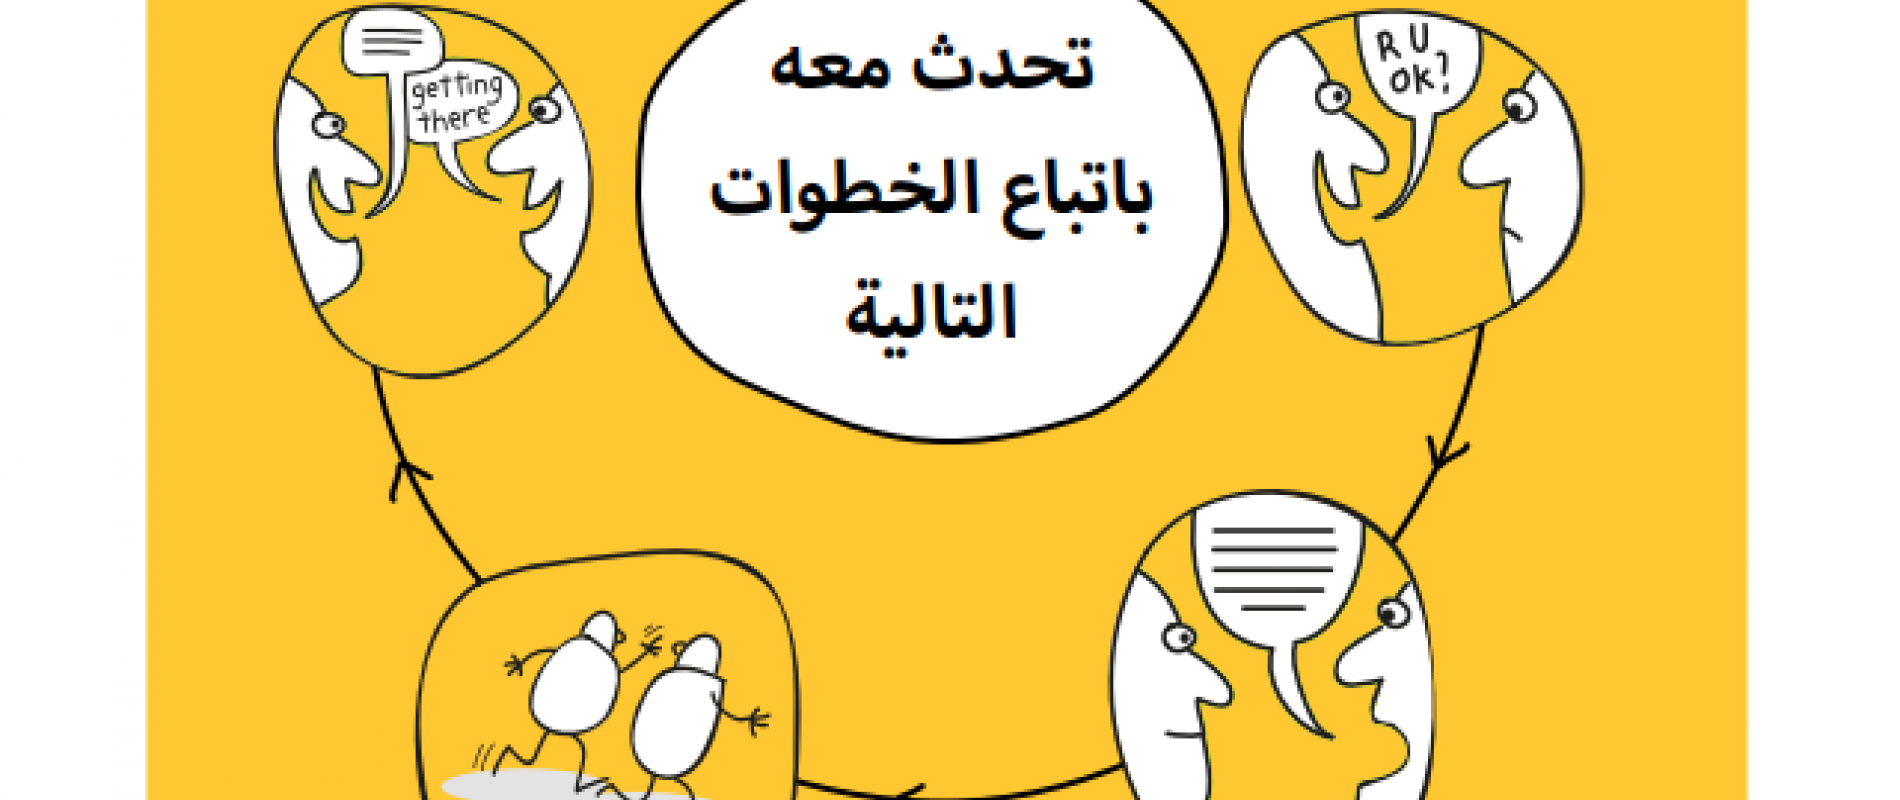 RUOK text in Arabic